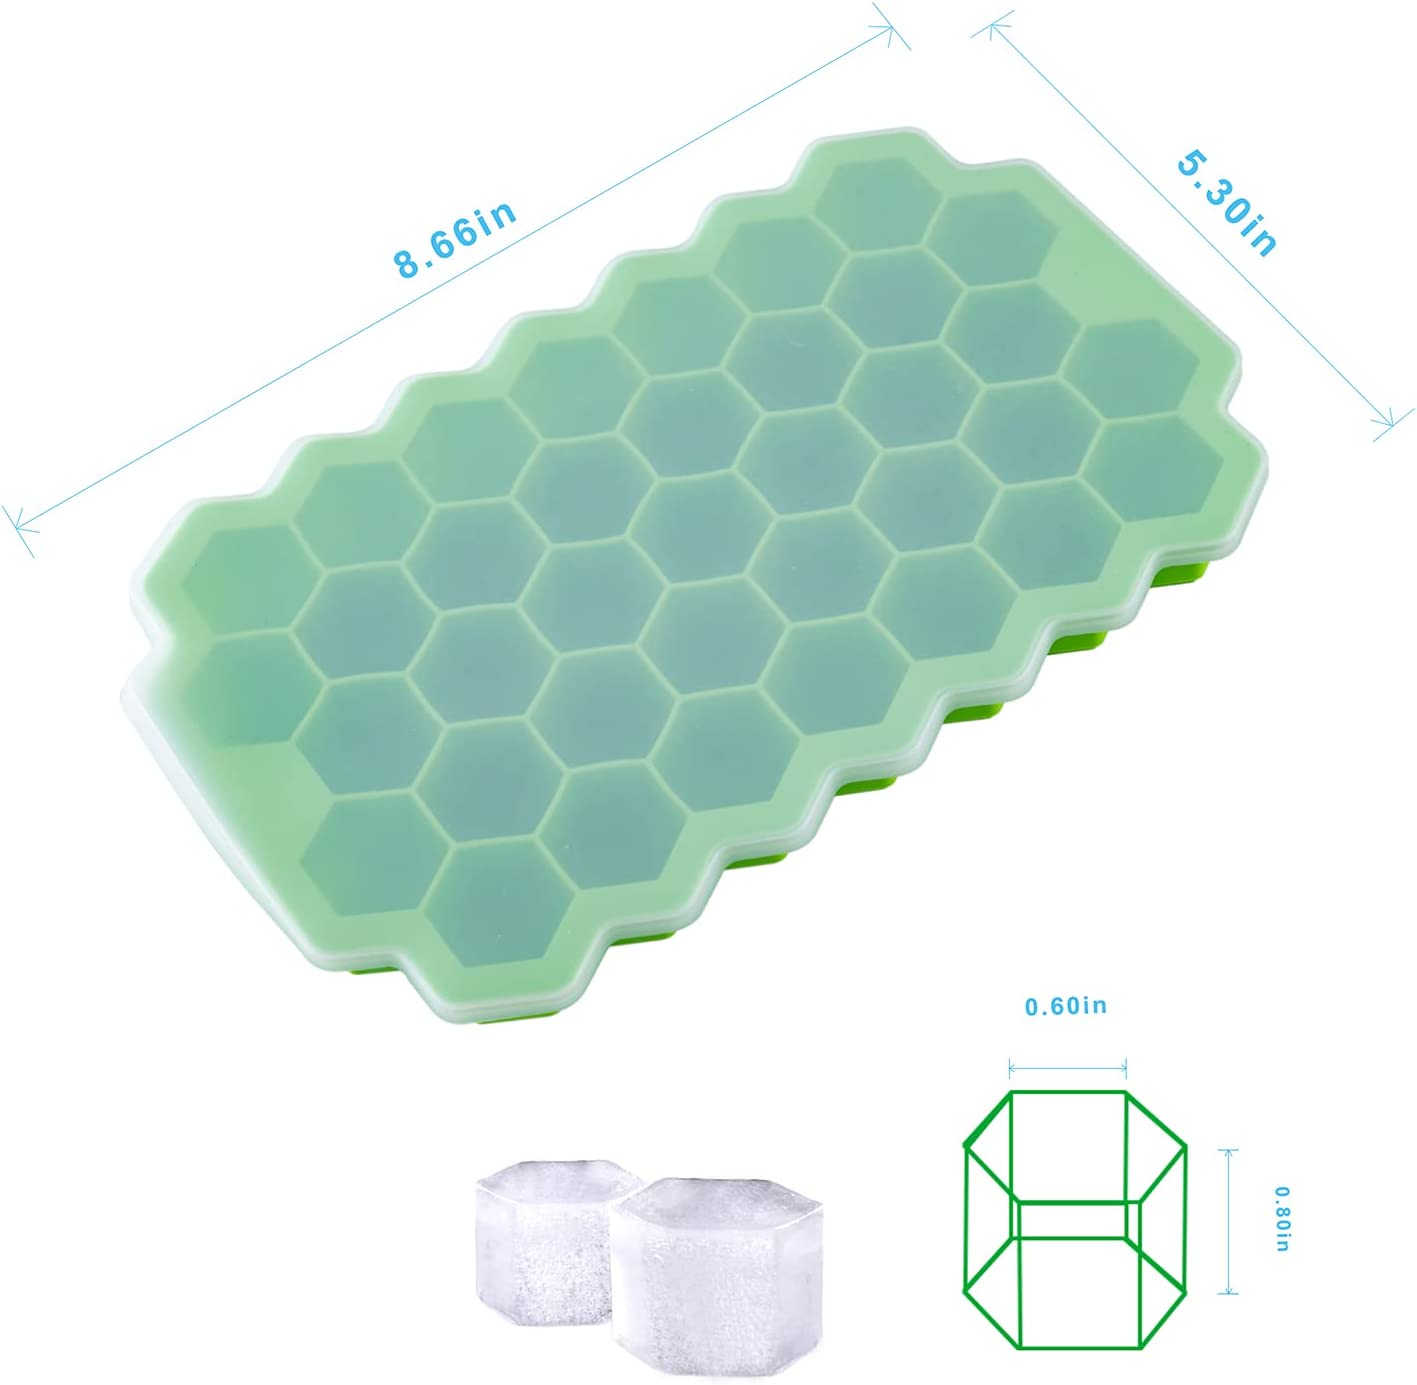 2 PCS Premium Ice Cube Trays, Treamon Silicone Ice Cube Molds with Sealing Lid, 74-Ice Trays, Reusable, Safe Hexagonal Ice Cube Molds, for Chilled Drinks, Whiskey, Cocktail, Food